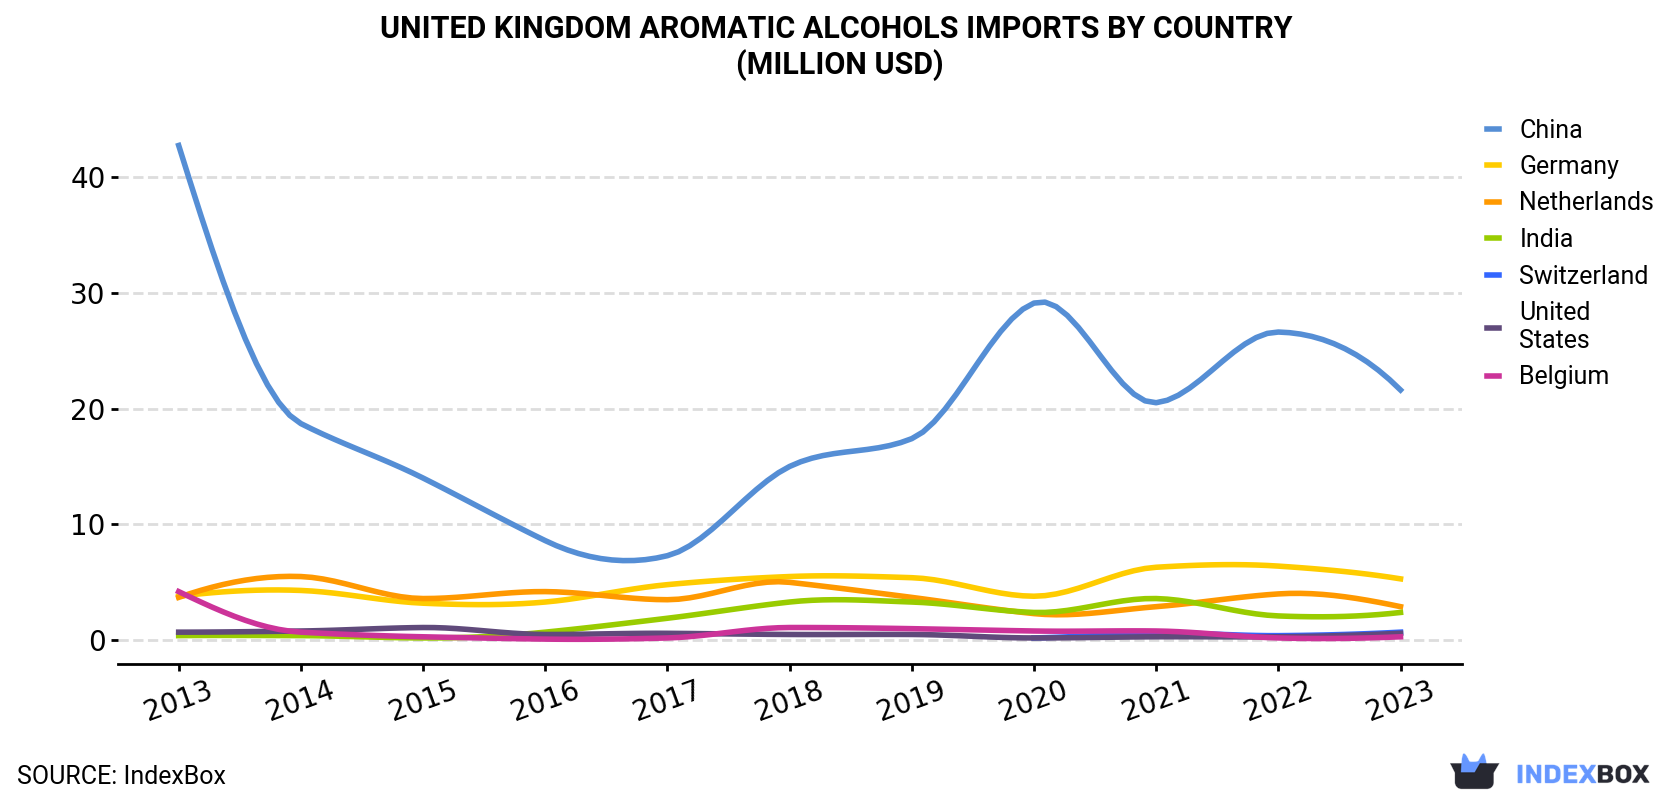 United Kingdom Aromatic Alcohols Imports By Country (Million USD)